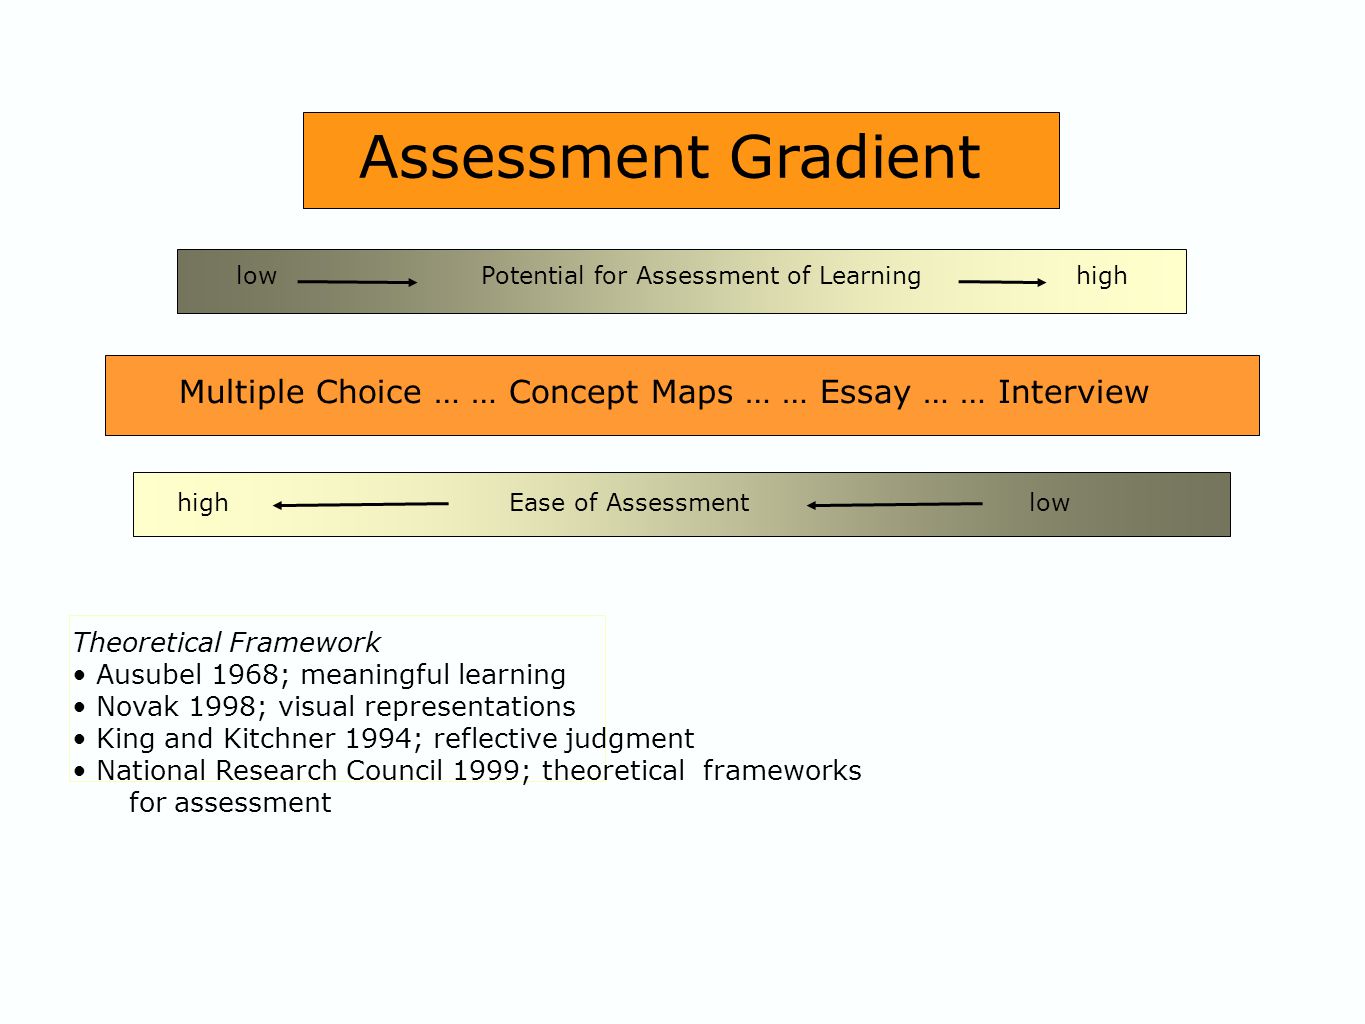 Multiple Choice … … Concept Maps … … Essay … … Interview high Ease of Assessment low low Potential for Assessment of Learning high Theoretical Framework Ausubel 1968; meaningful learning Novak 1998; visual representations King and Kitchner 1994; reflective judgment National Research Council 1999; theoretical frameworks for assessment Assessment Gradient